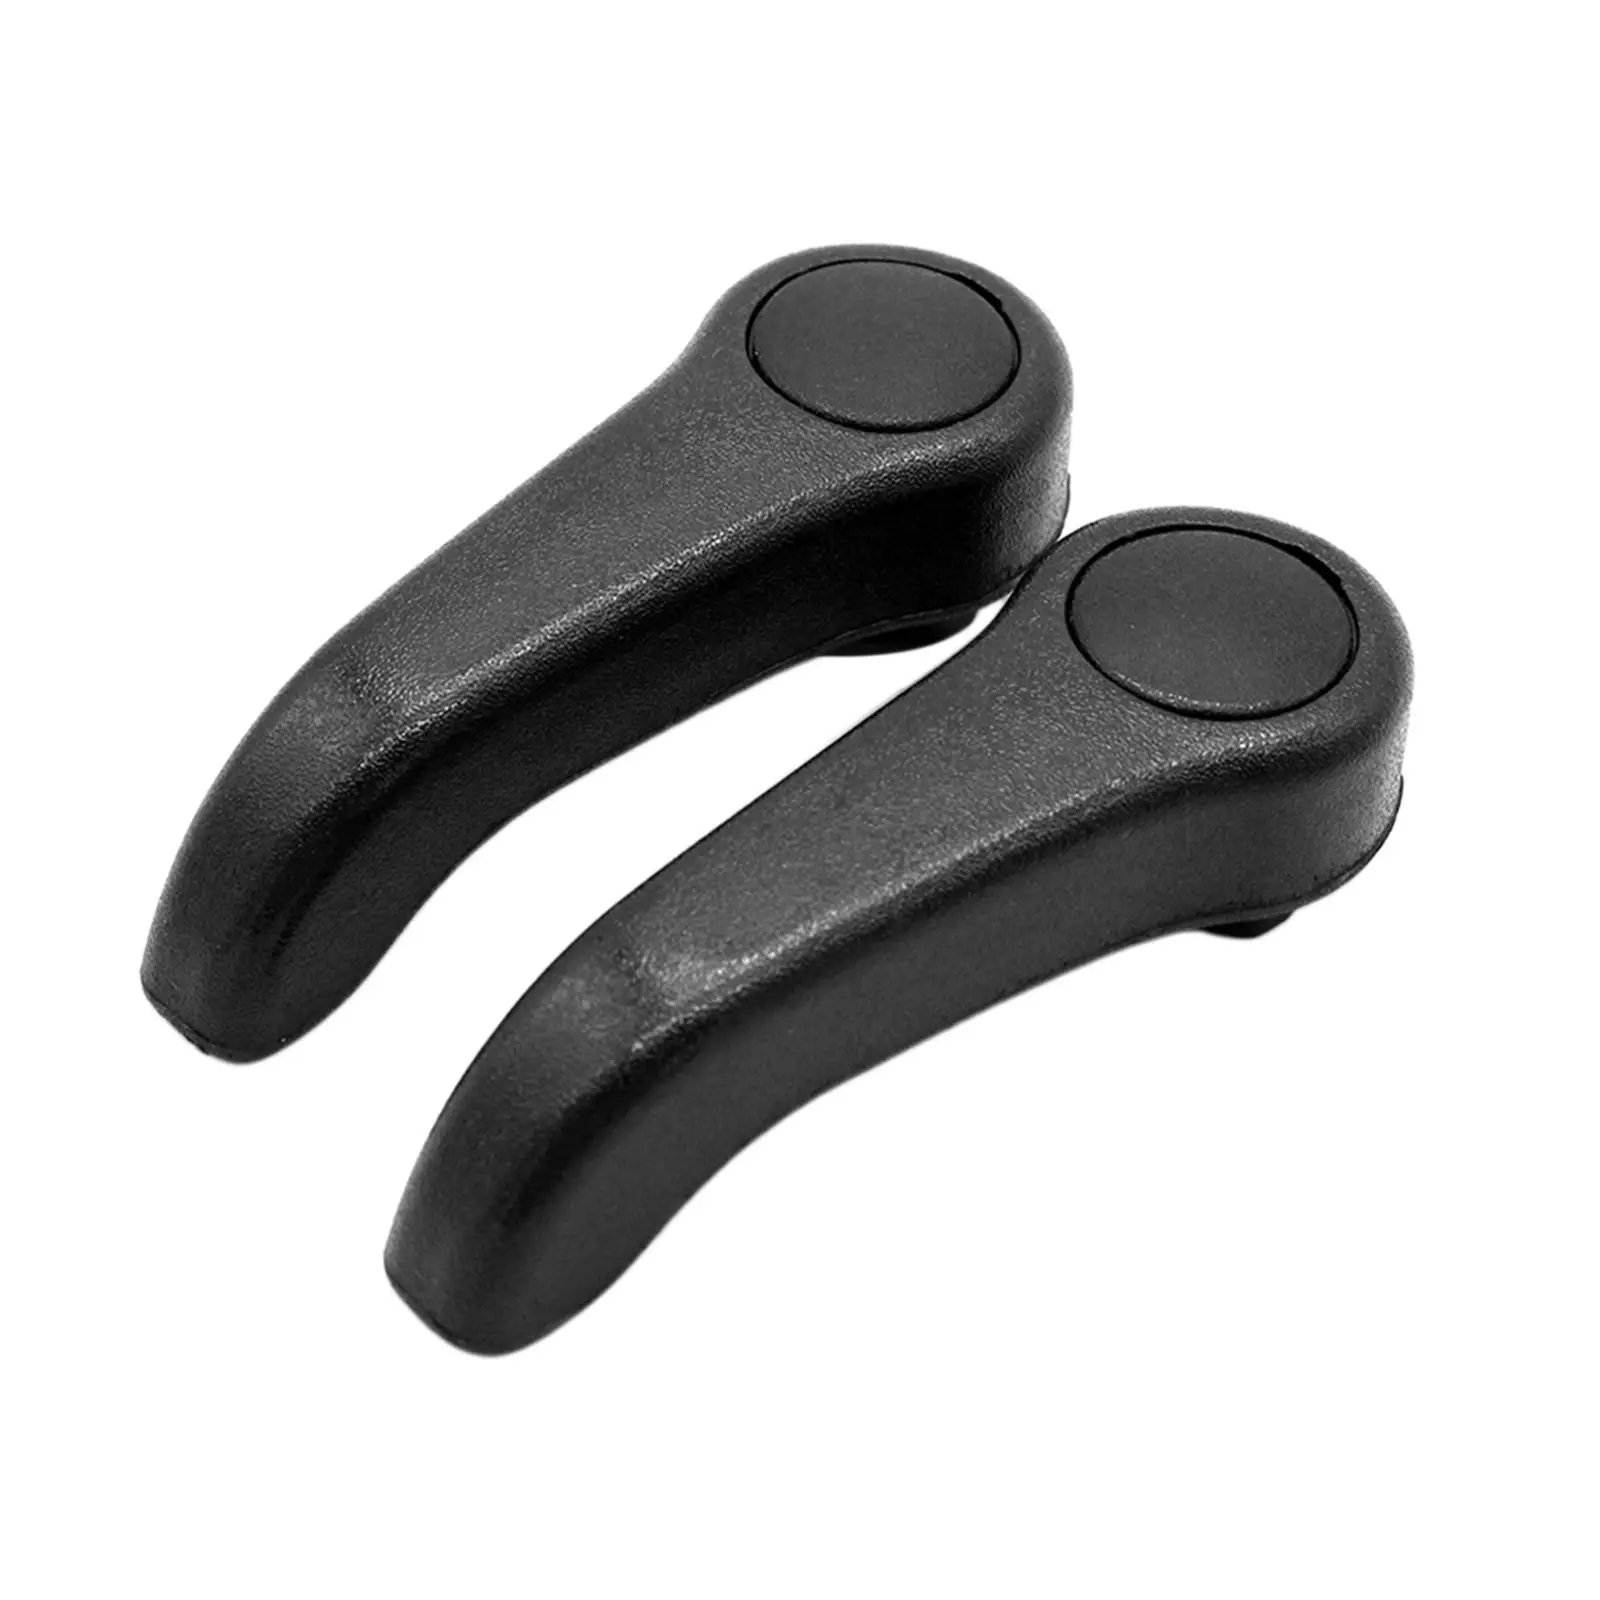 Handle Adjustment Grip, Durable Parts Accessory Portable Replaces Practical car Adjuster Lever for MK2 7701205708